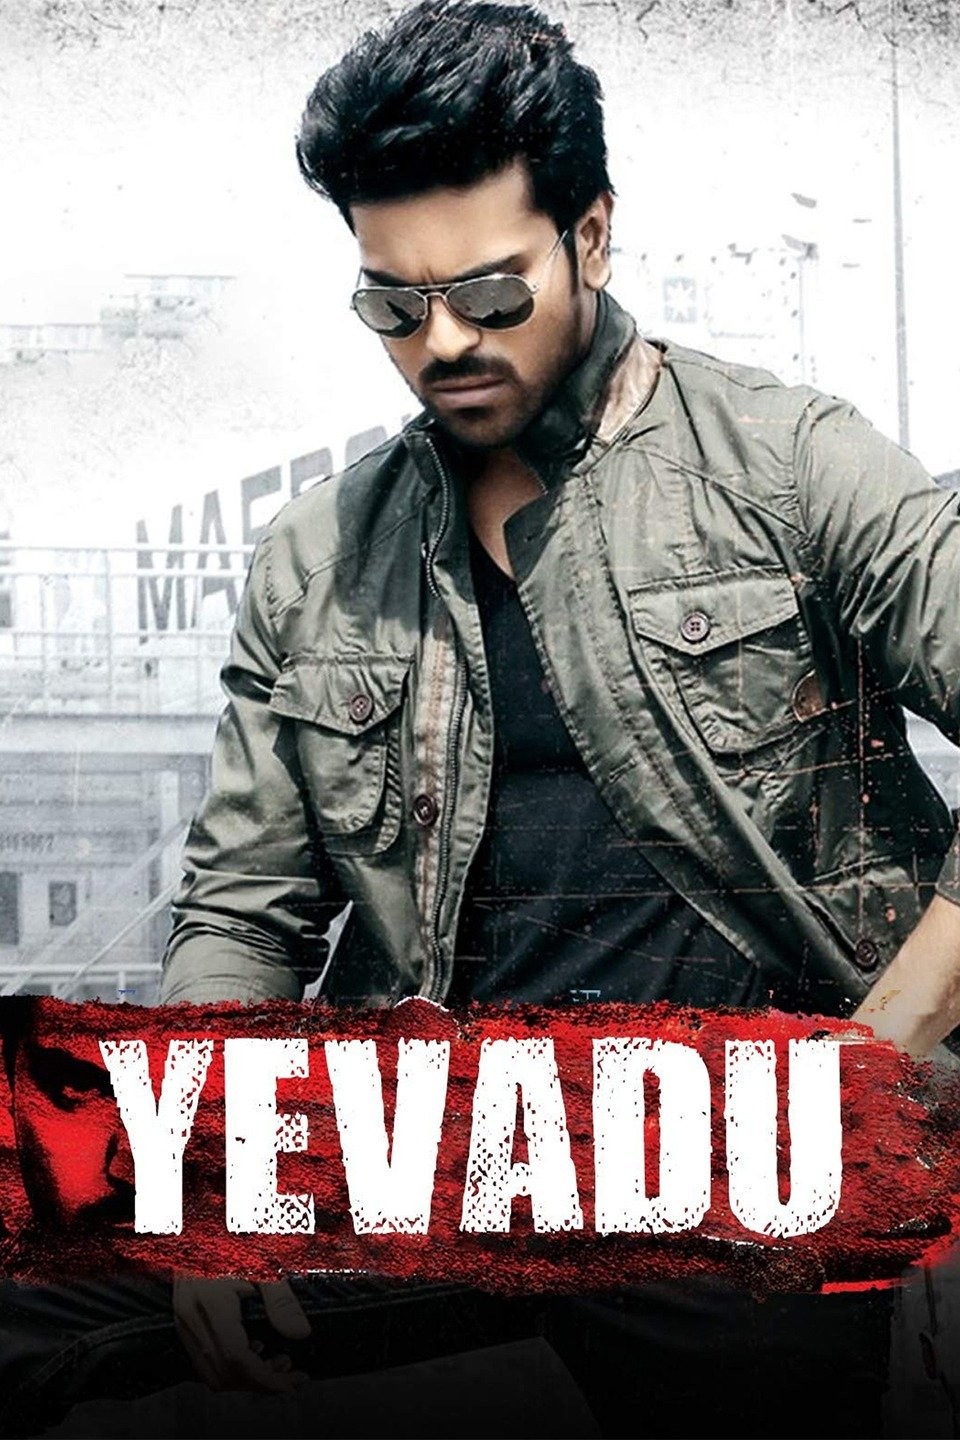 Yevadu Shooting Stopped For A Day